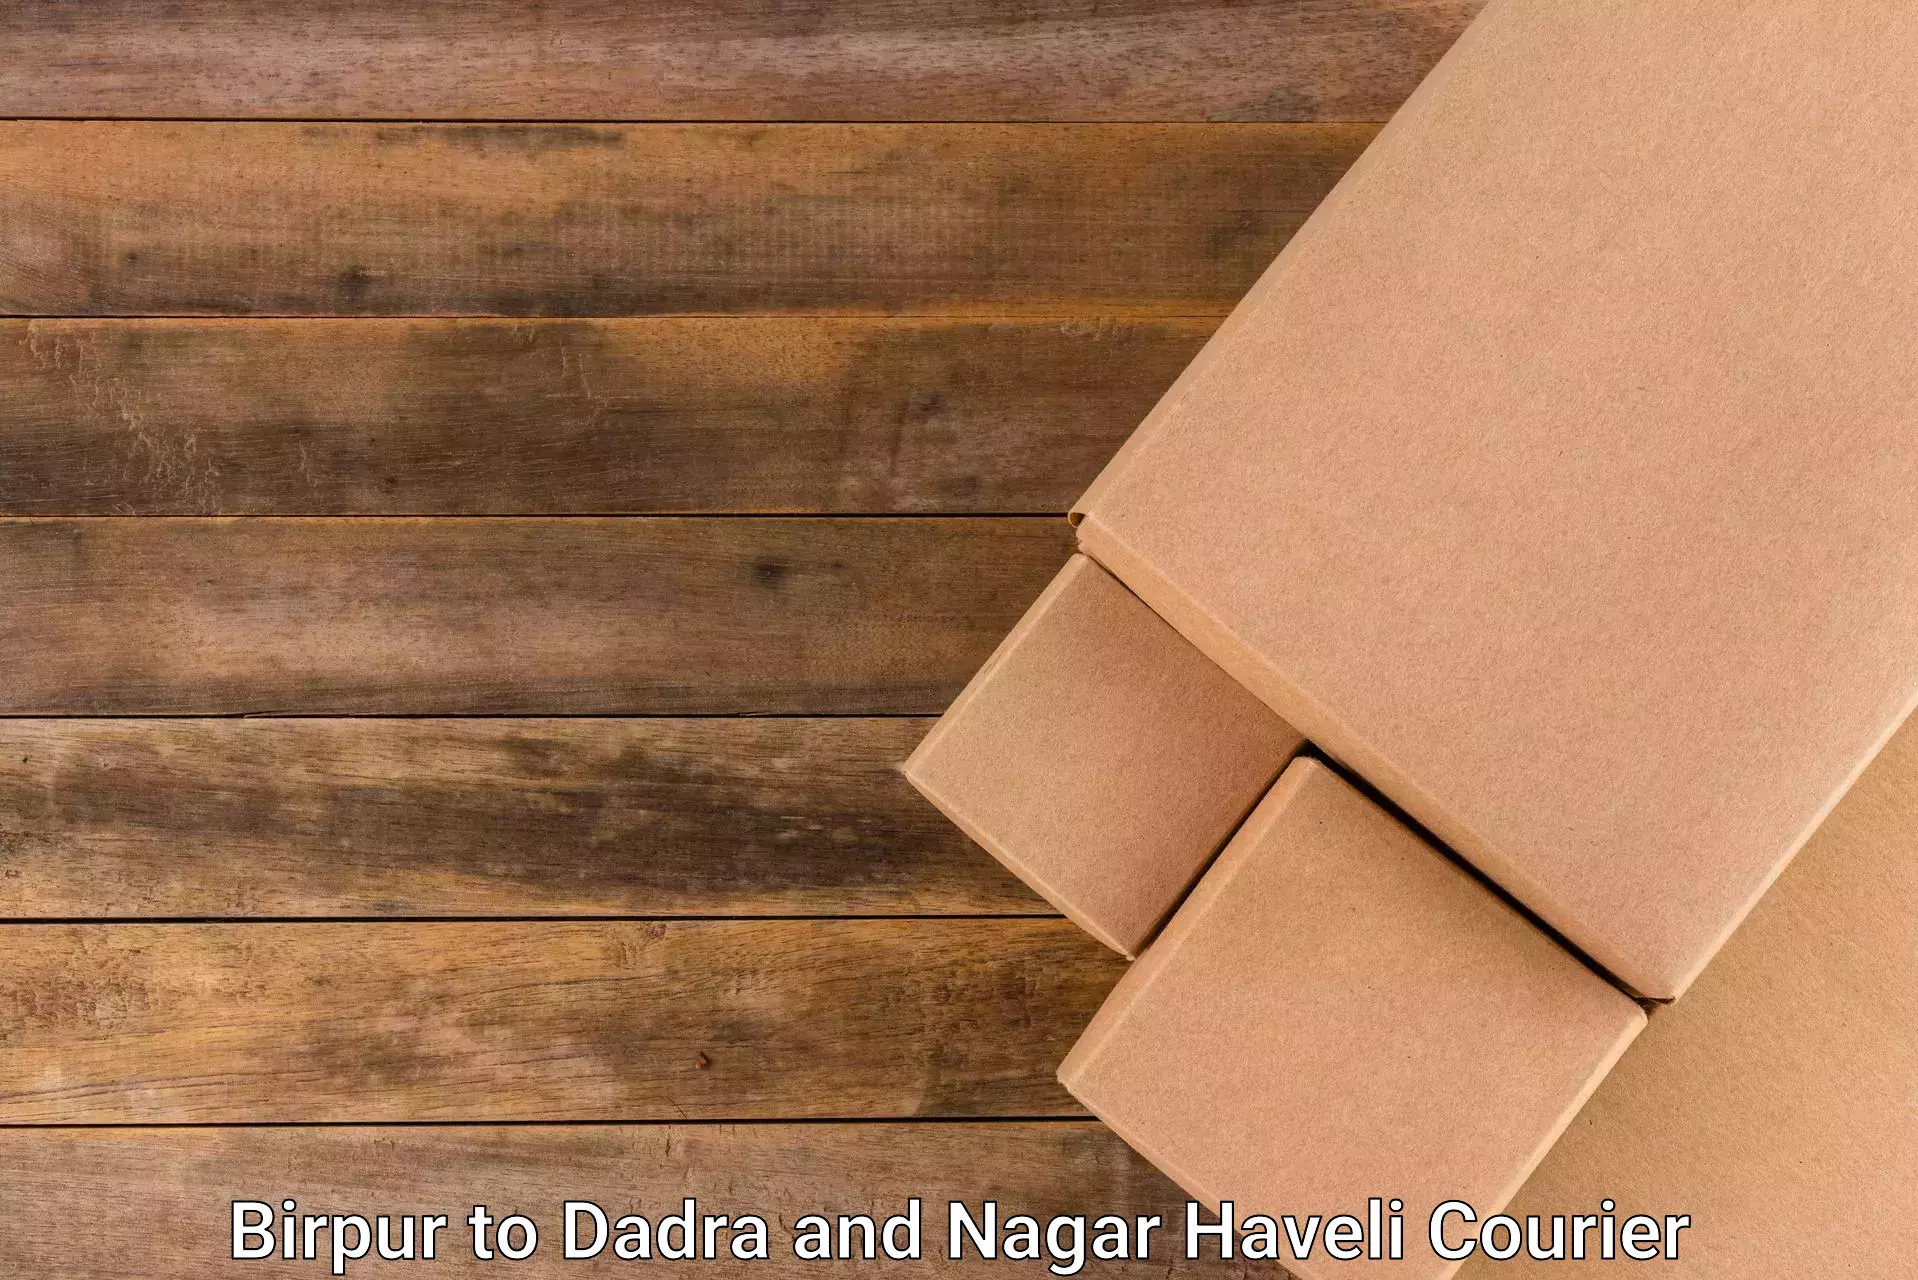 Easy access courier services Birpur to Dadra and Nagar Haveli